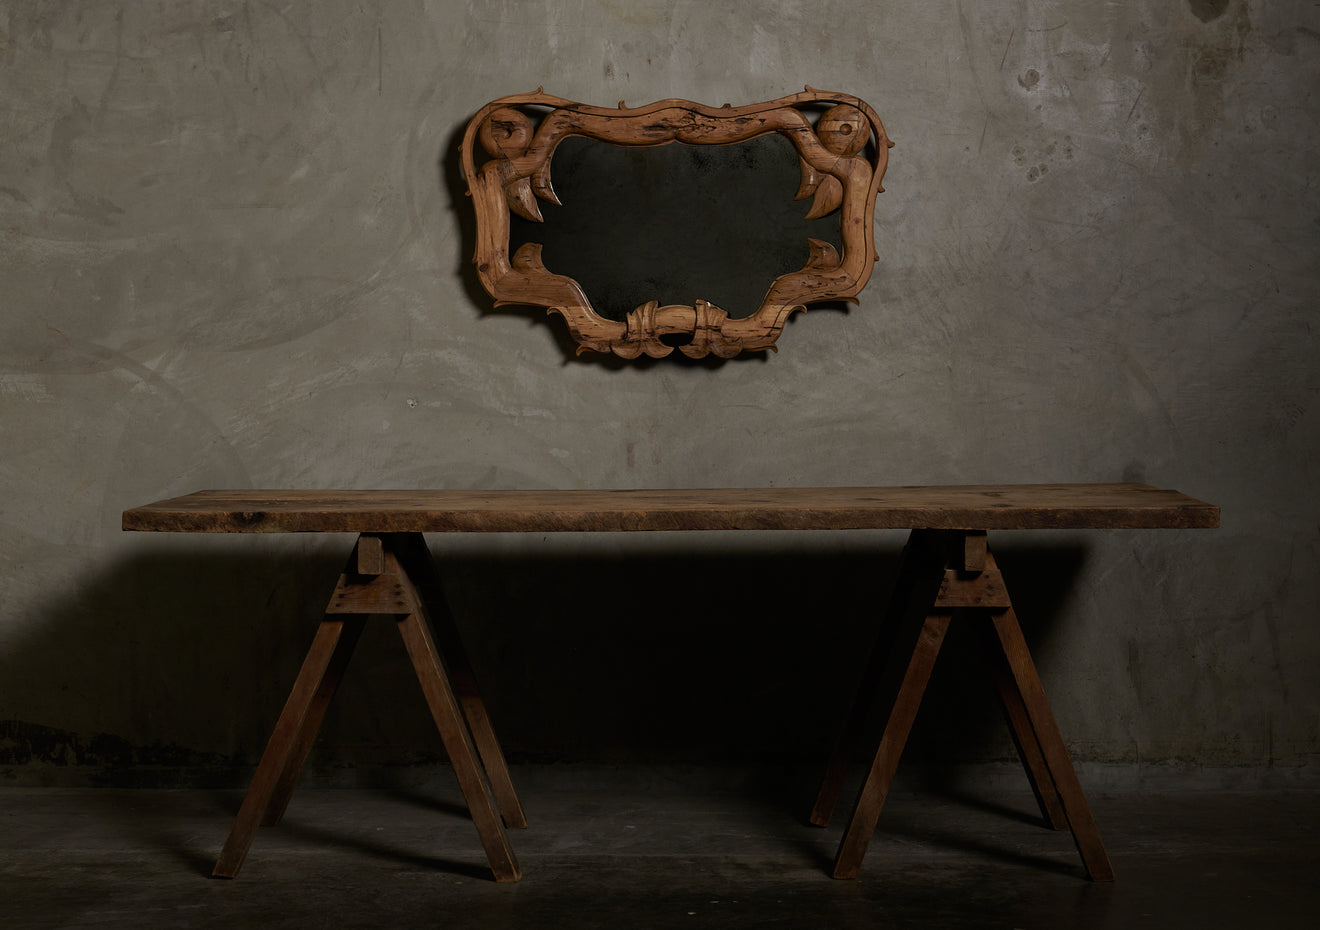 SERPIENTE FRAME(S) WITH ANTIQUE MIRROR BY MIKE DIAZ